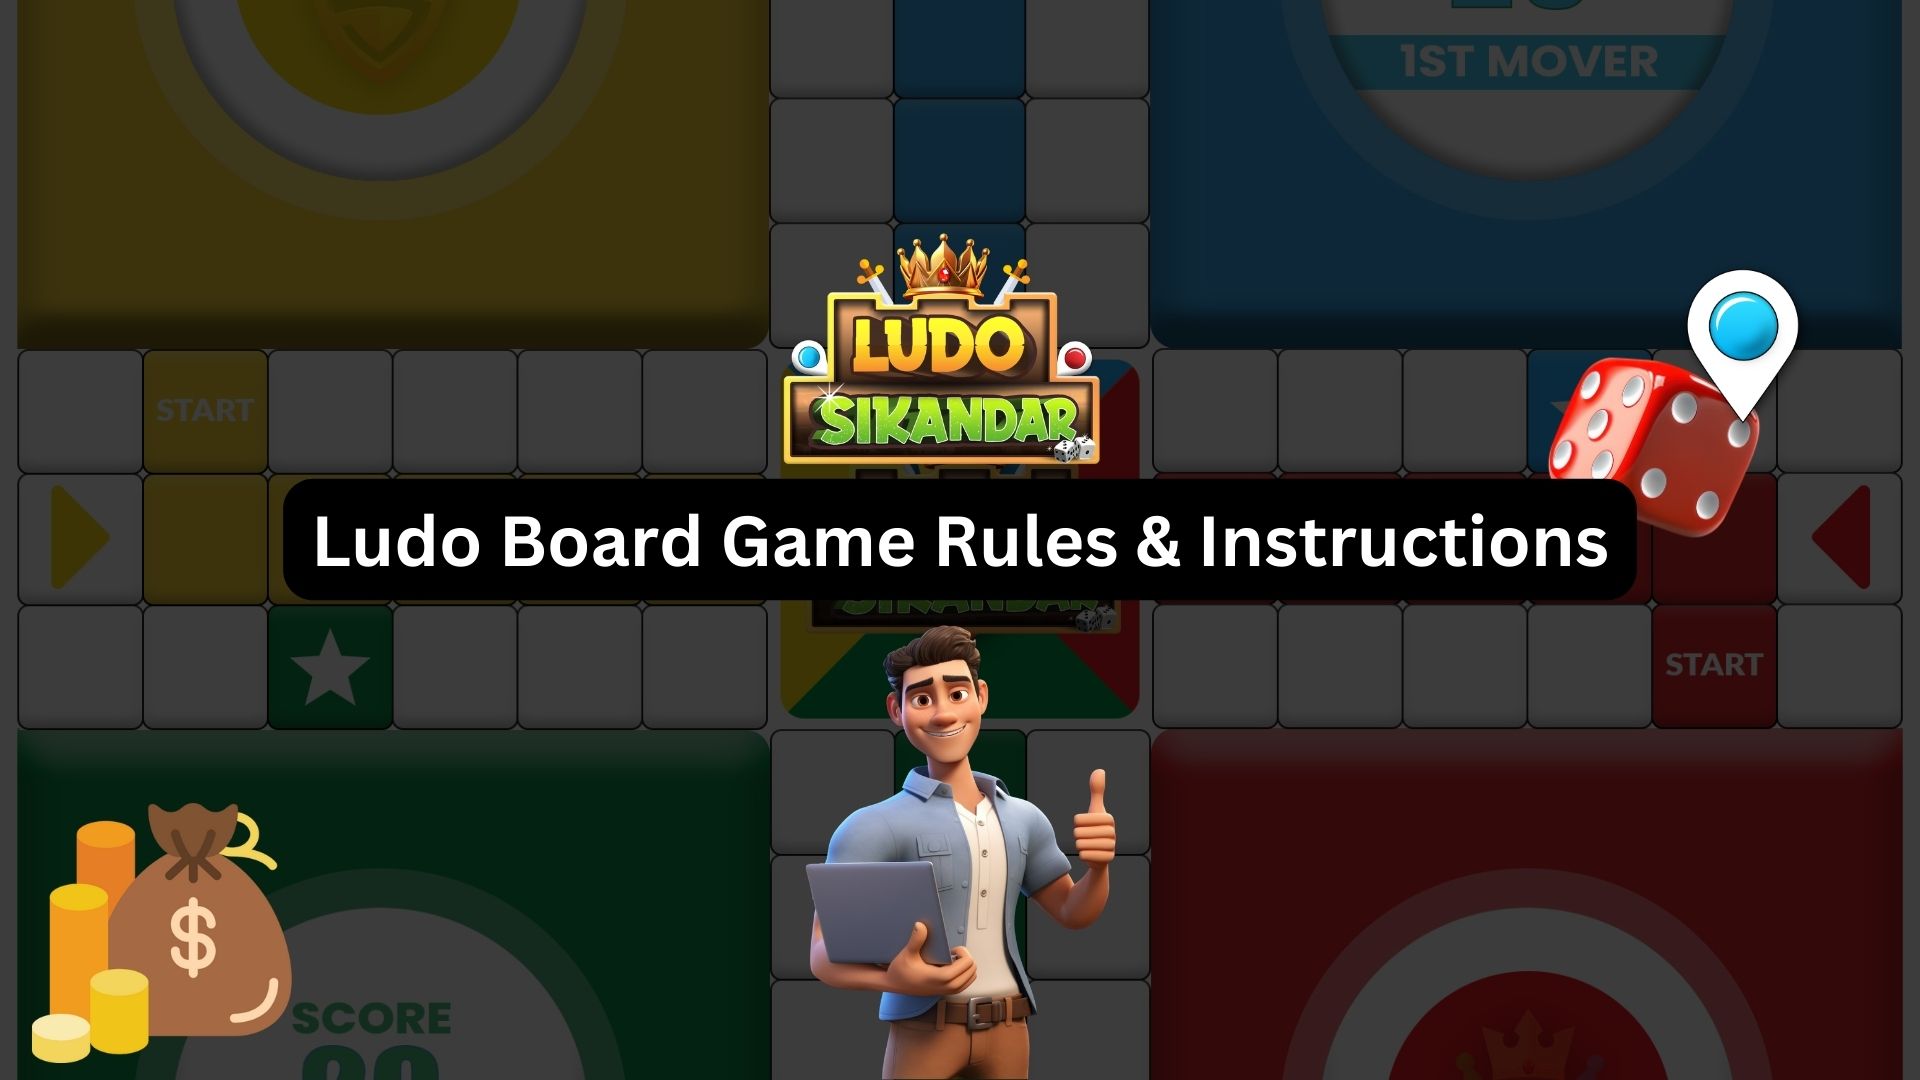 Ludo Board Game Rules & Instructions